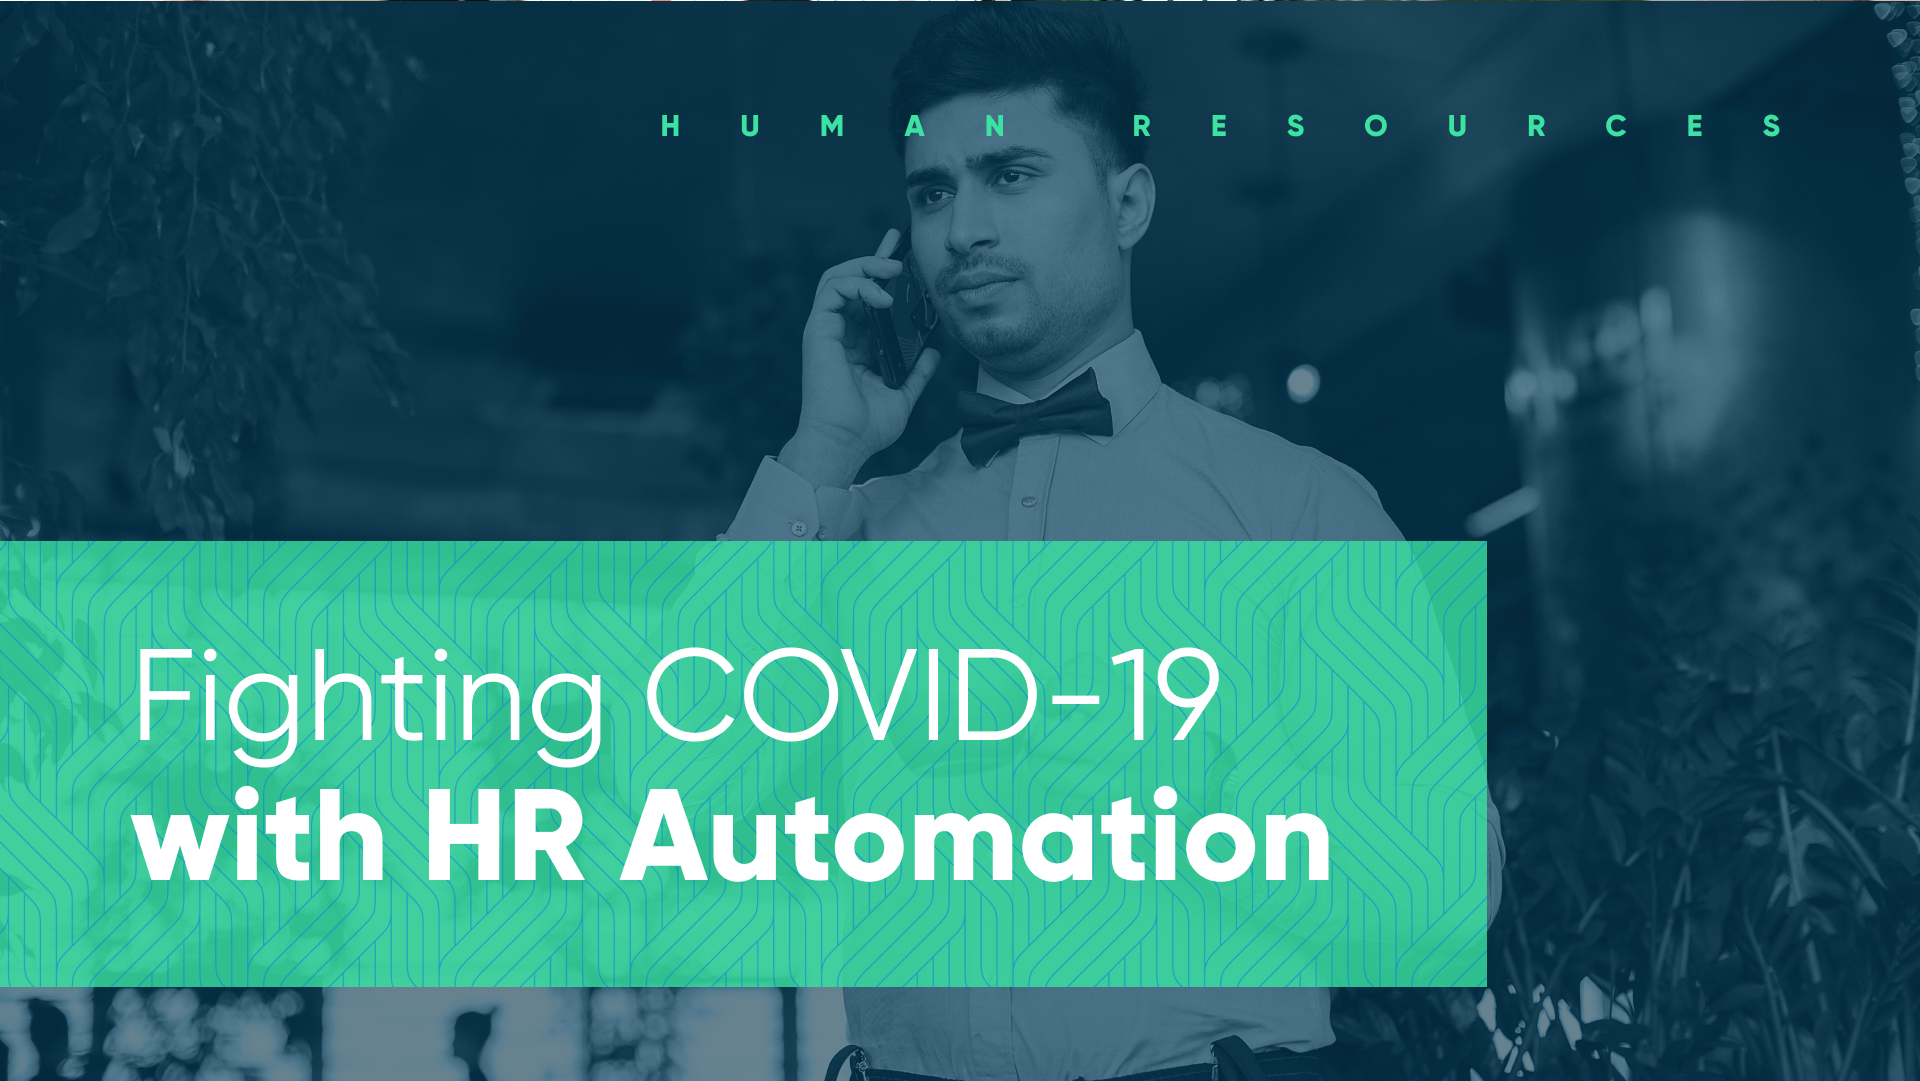 Rehire employees with HR automation